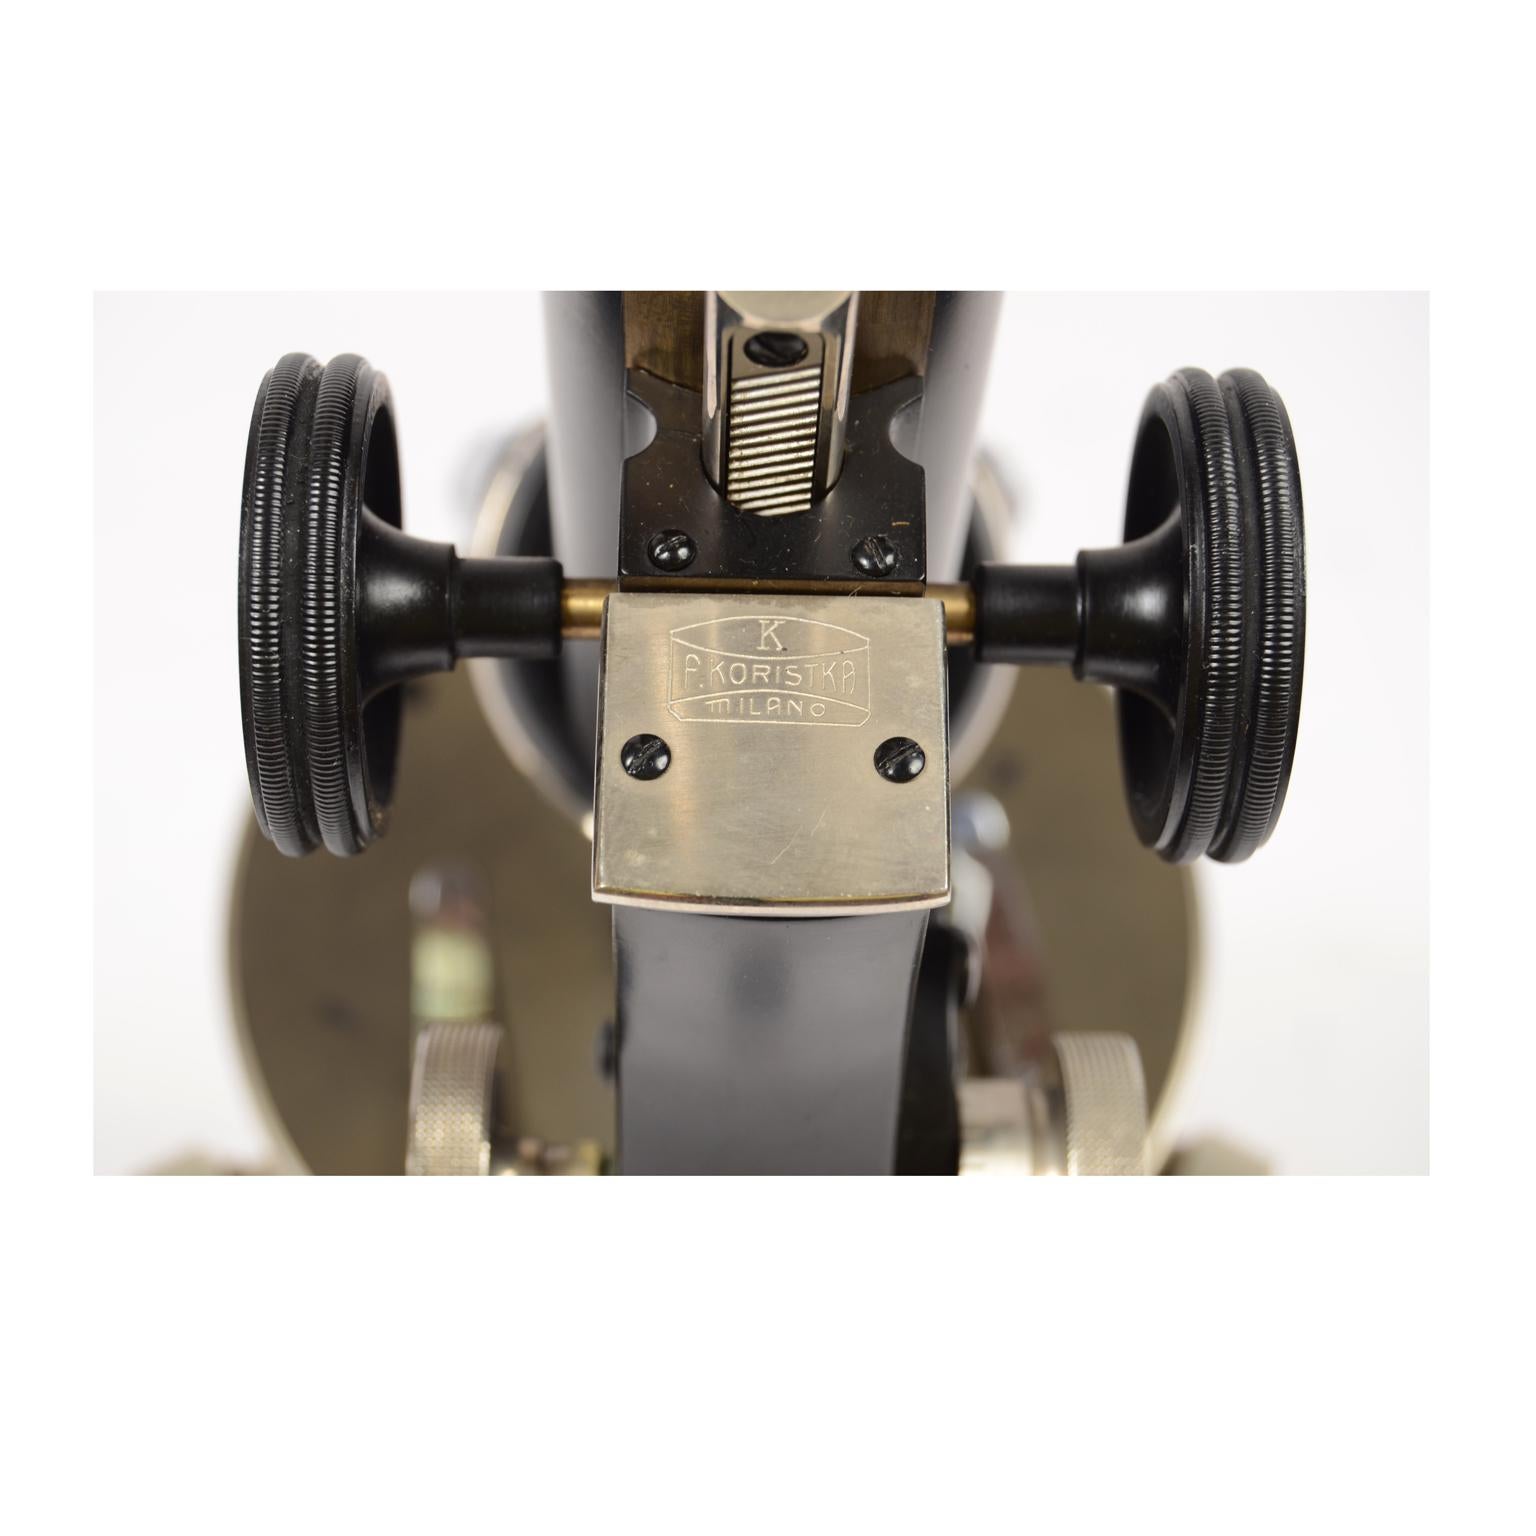 Optical microscope signed F.lli Koristka Milano n. 42870 produced between 1920/30, of chromed and black painted brass, three-magnification turret, consisting of a stand and a plate where the object or slide to be observed is placed, the light is